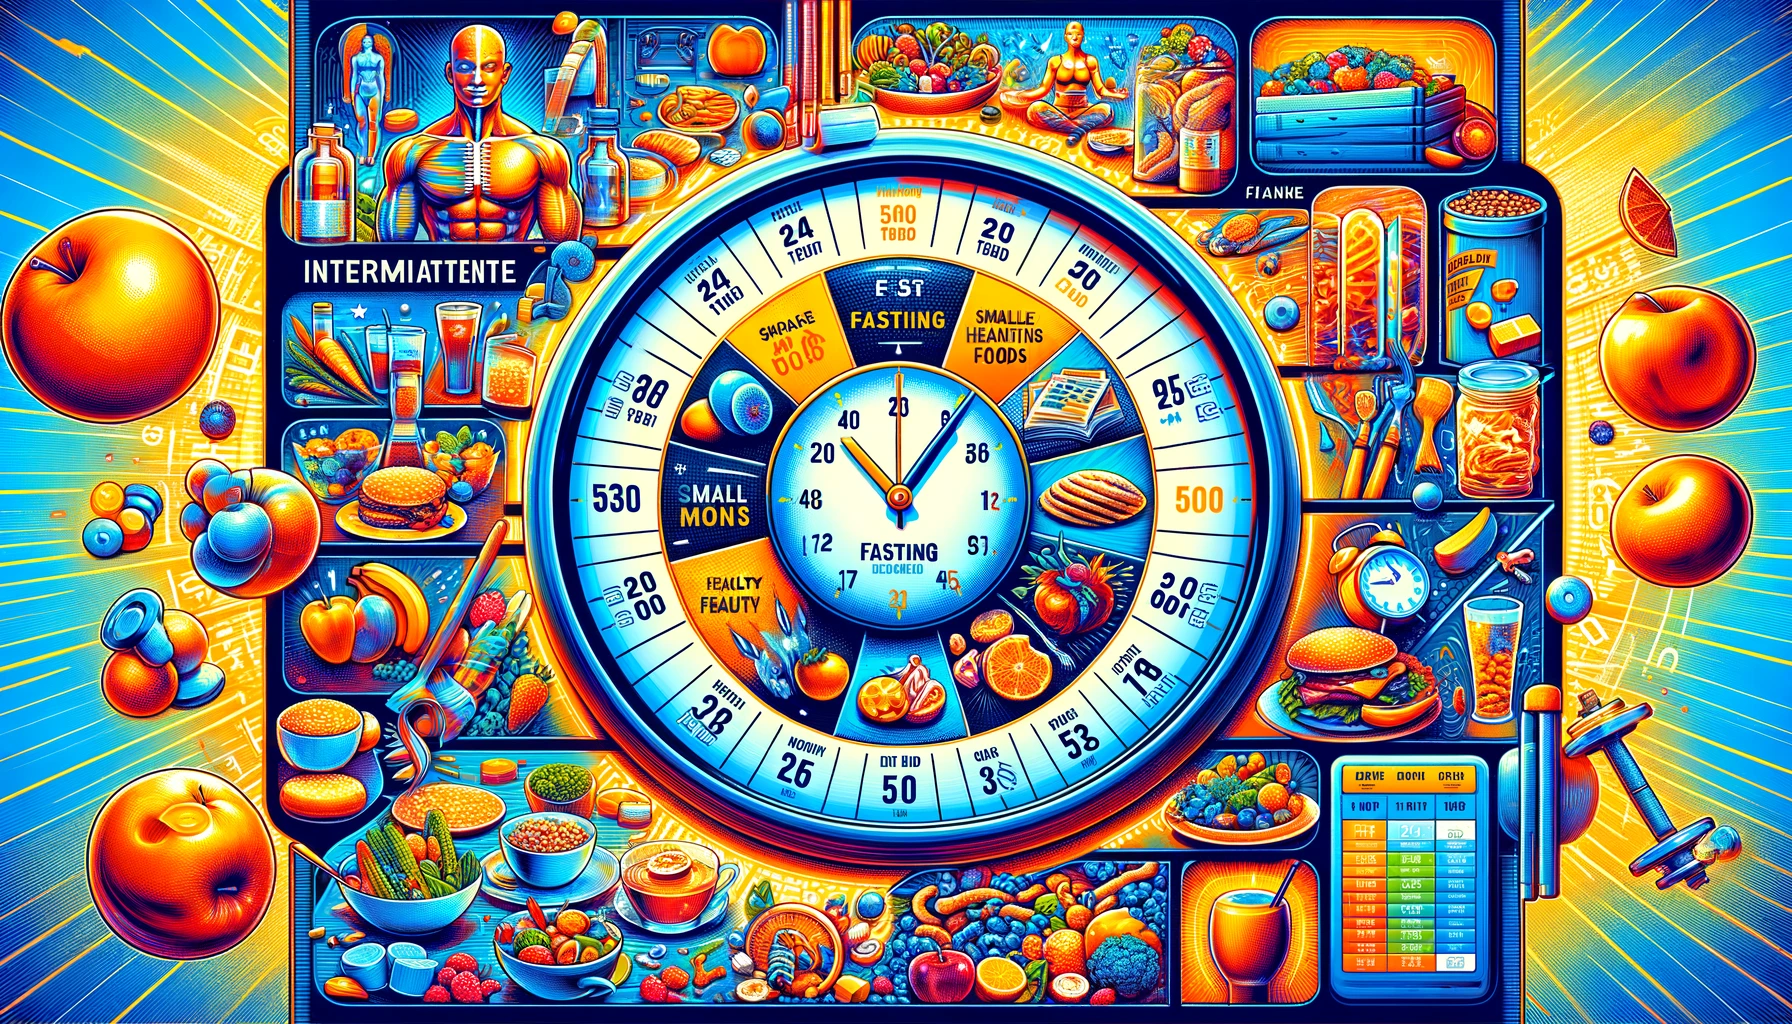 Illustration of intermittent fasting with a calendar showing 5:2 diet days and a clock for the 16:8 method, highlighting healthy foods and fasting periods.